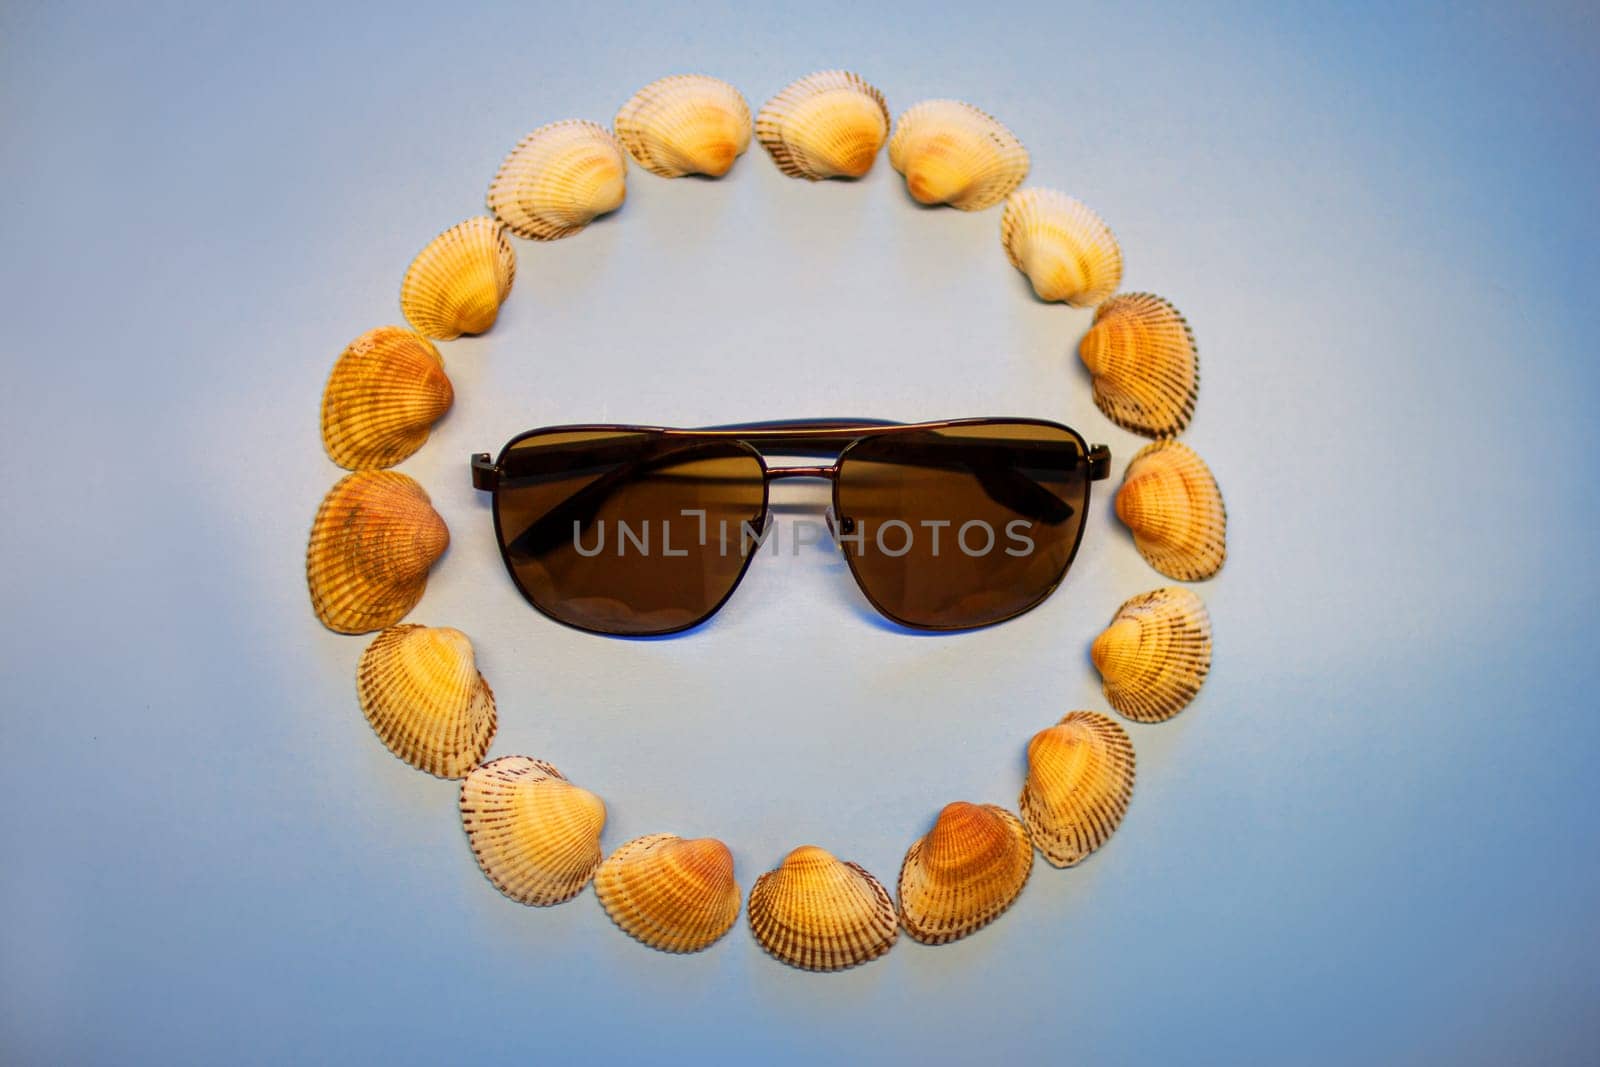 Sunglasses in a circle of shells. High quality photo